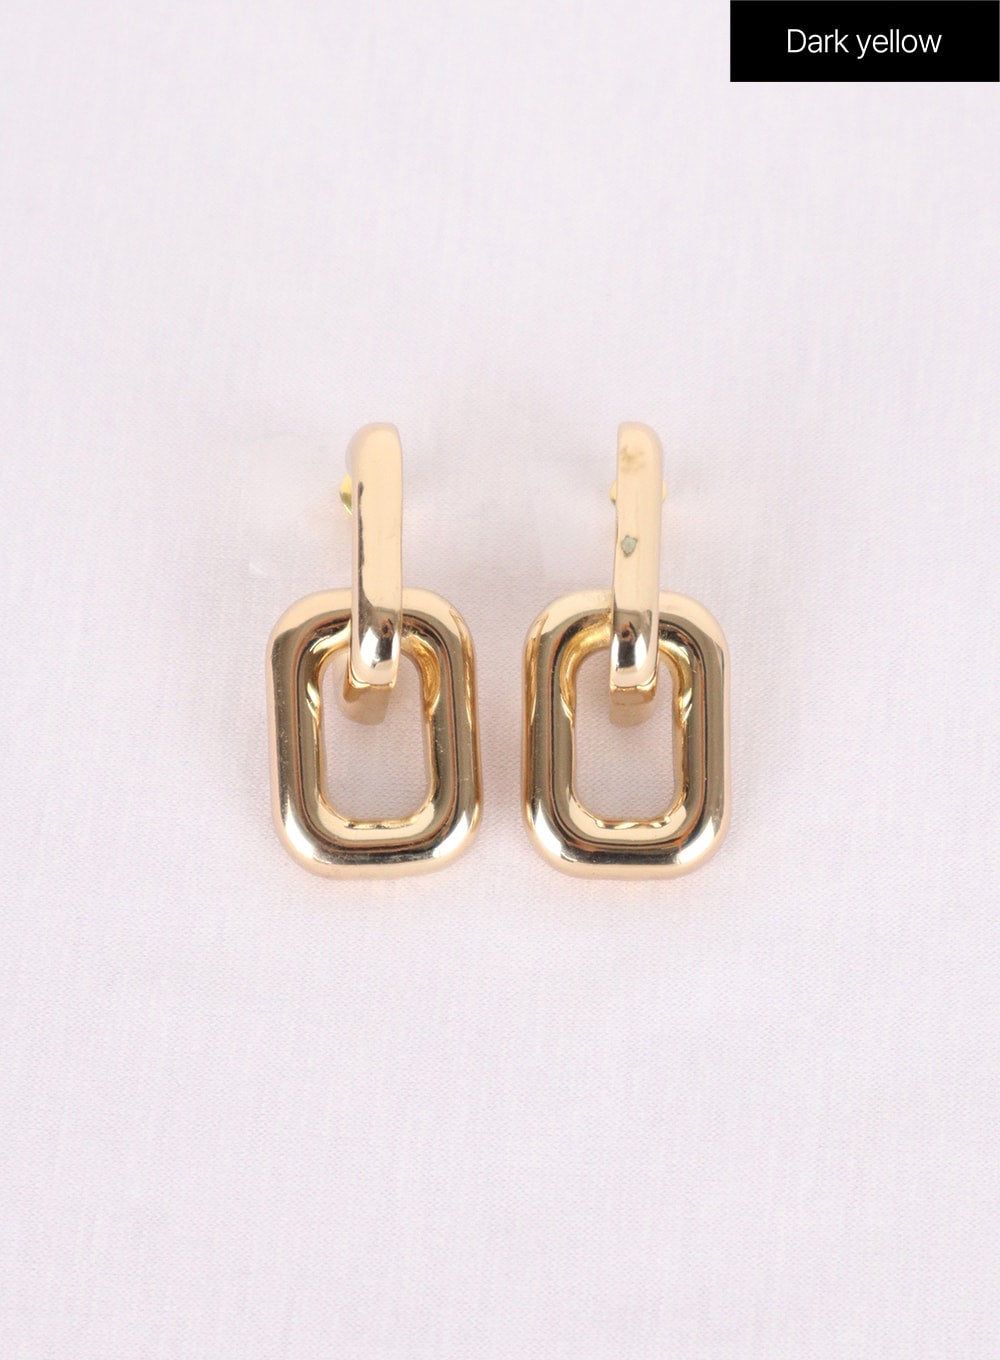 bold-square-chain-earrings-in302 / Dark yellow